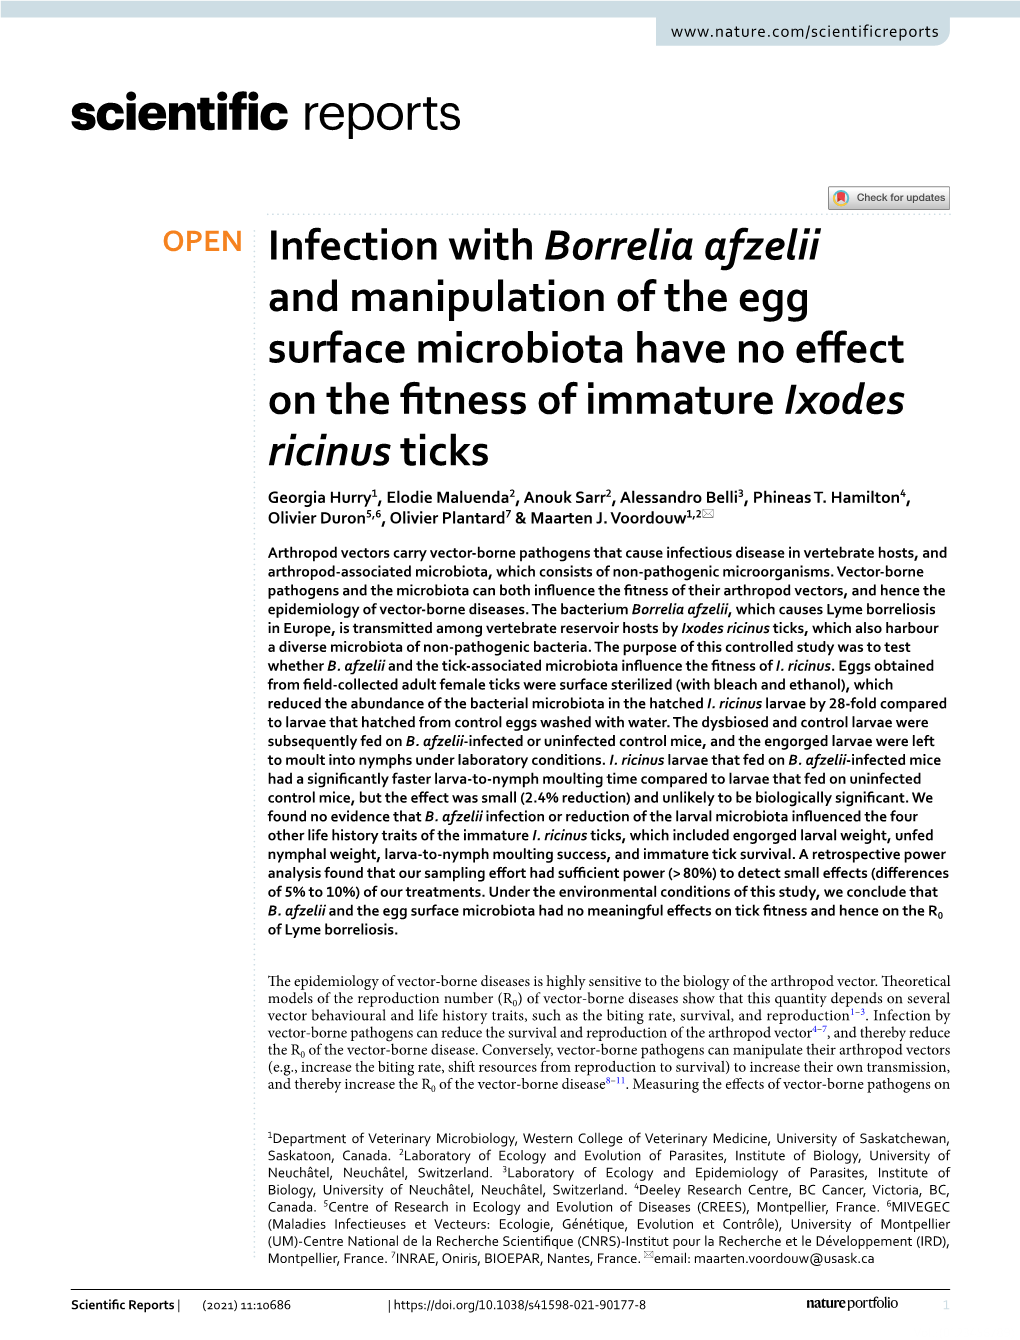 Infection with Borrelia Afzelii and Manipulation of the Egg Surface Microbiota Have No Effect on the Fitness of Immature Ixodes